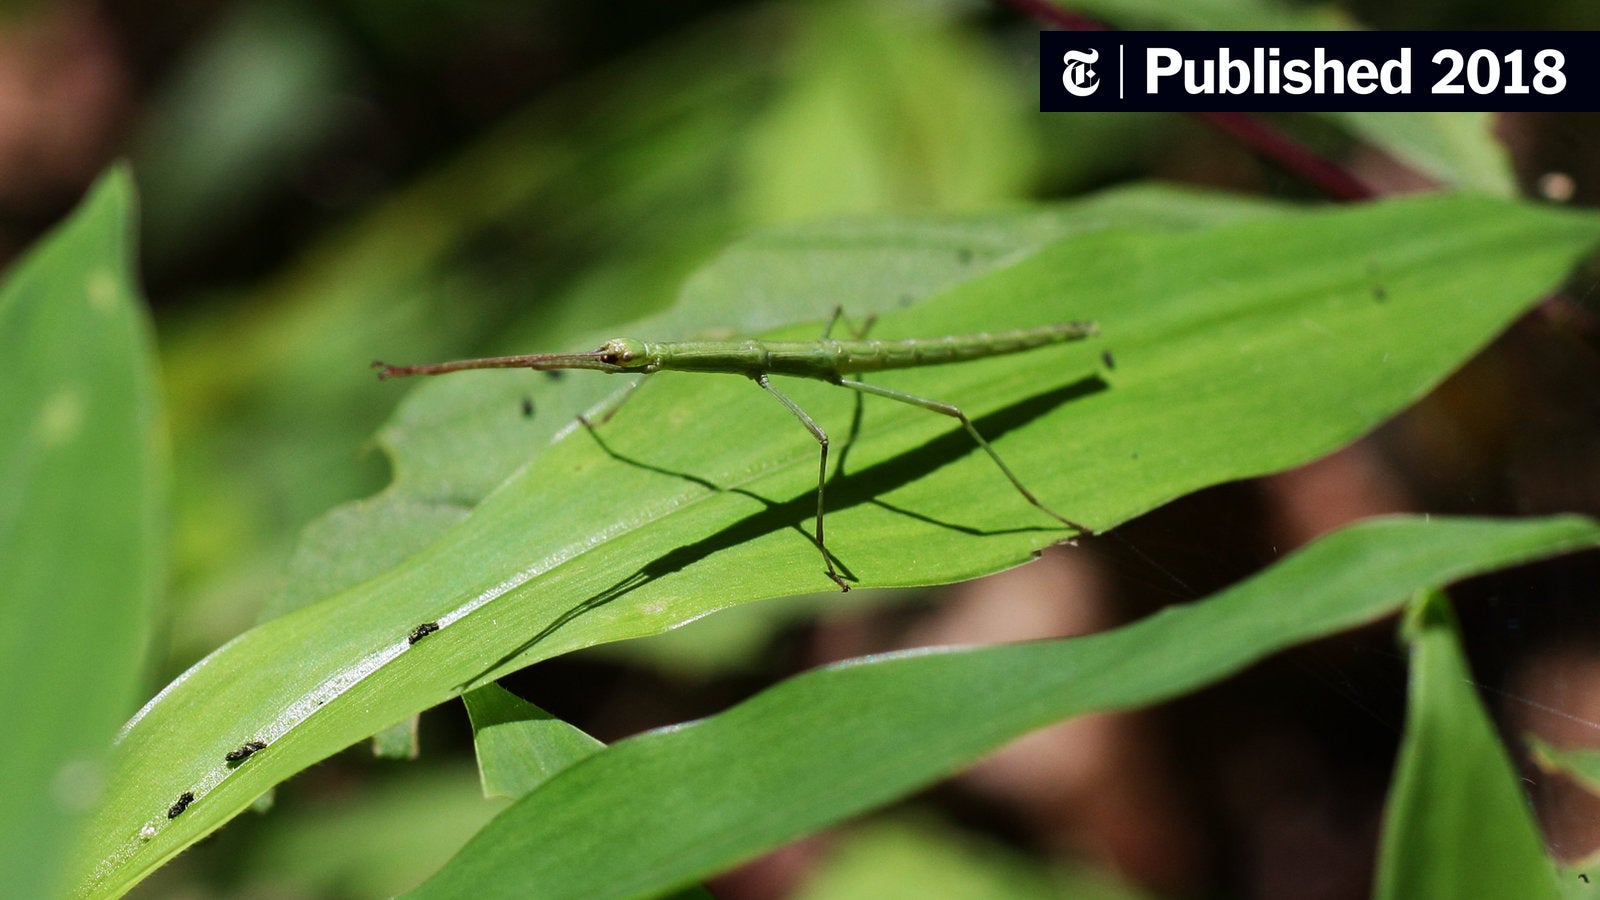 Stick insects are easy bird food and that might help them reproduce